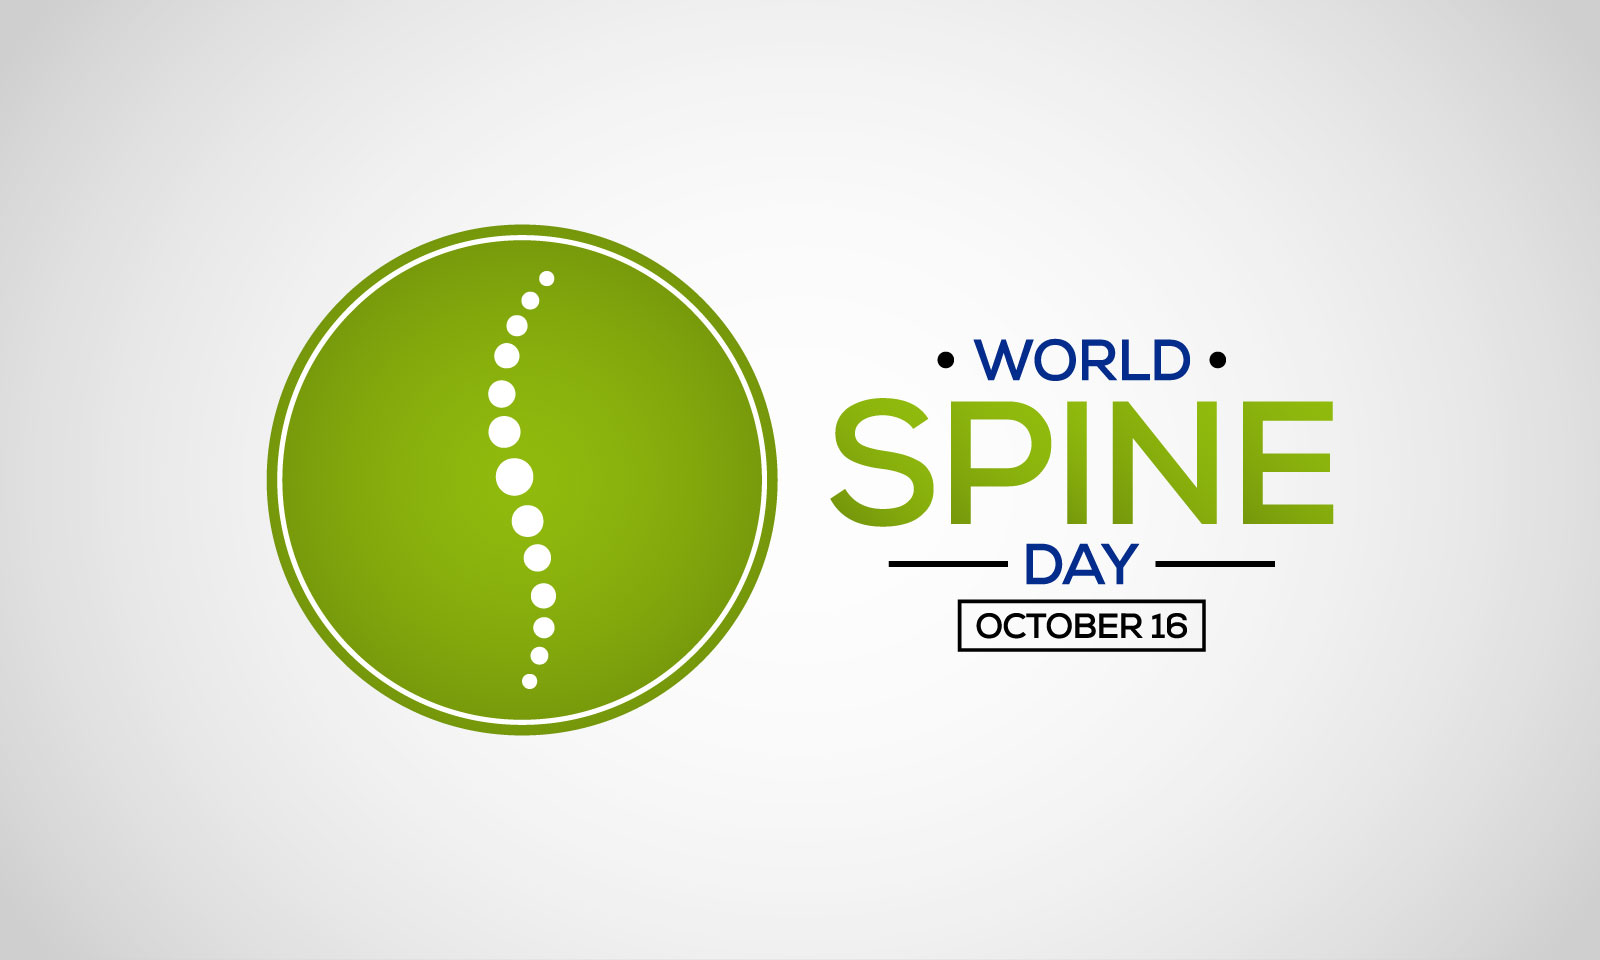 Getting back on track for World Spine Day